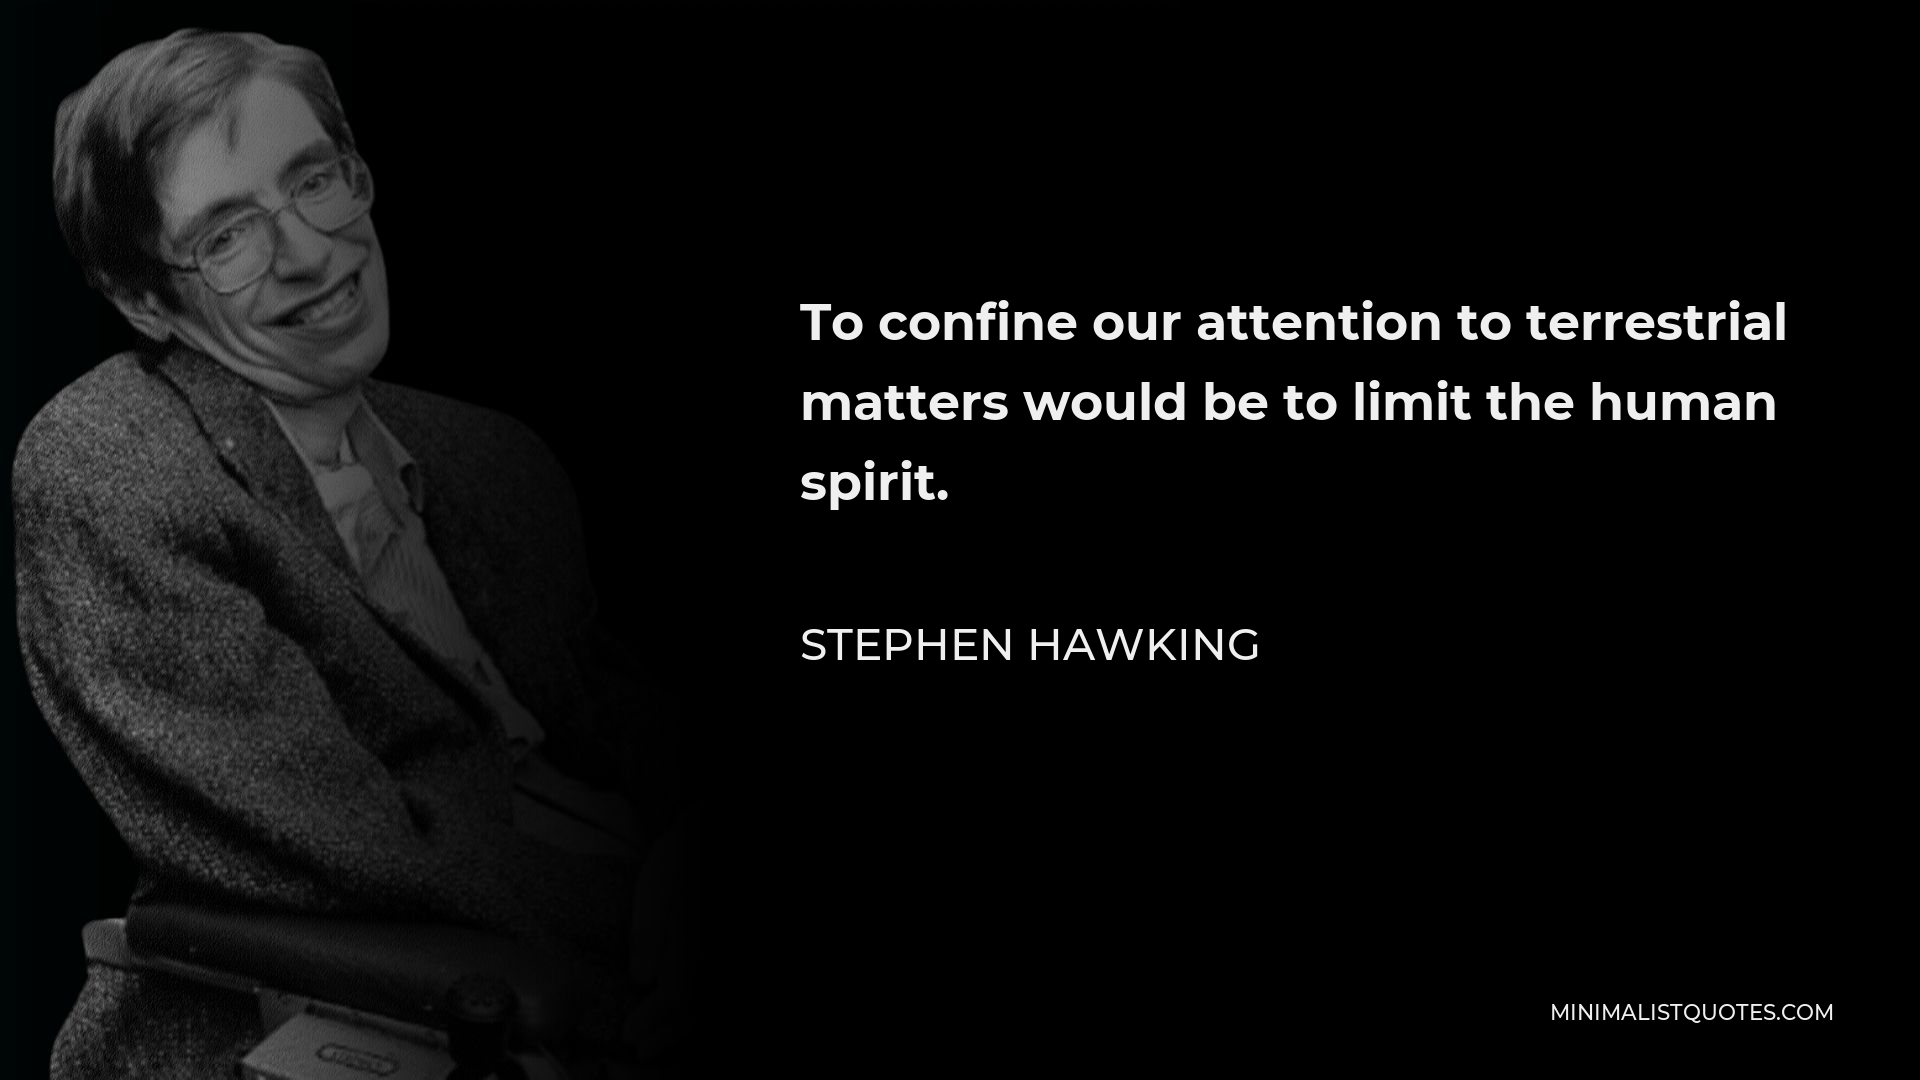 Stephen Hawking Quote - To confine our attention to terrestrial matters would be to limit the human spirit.